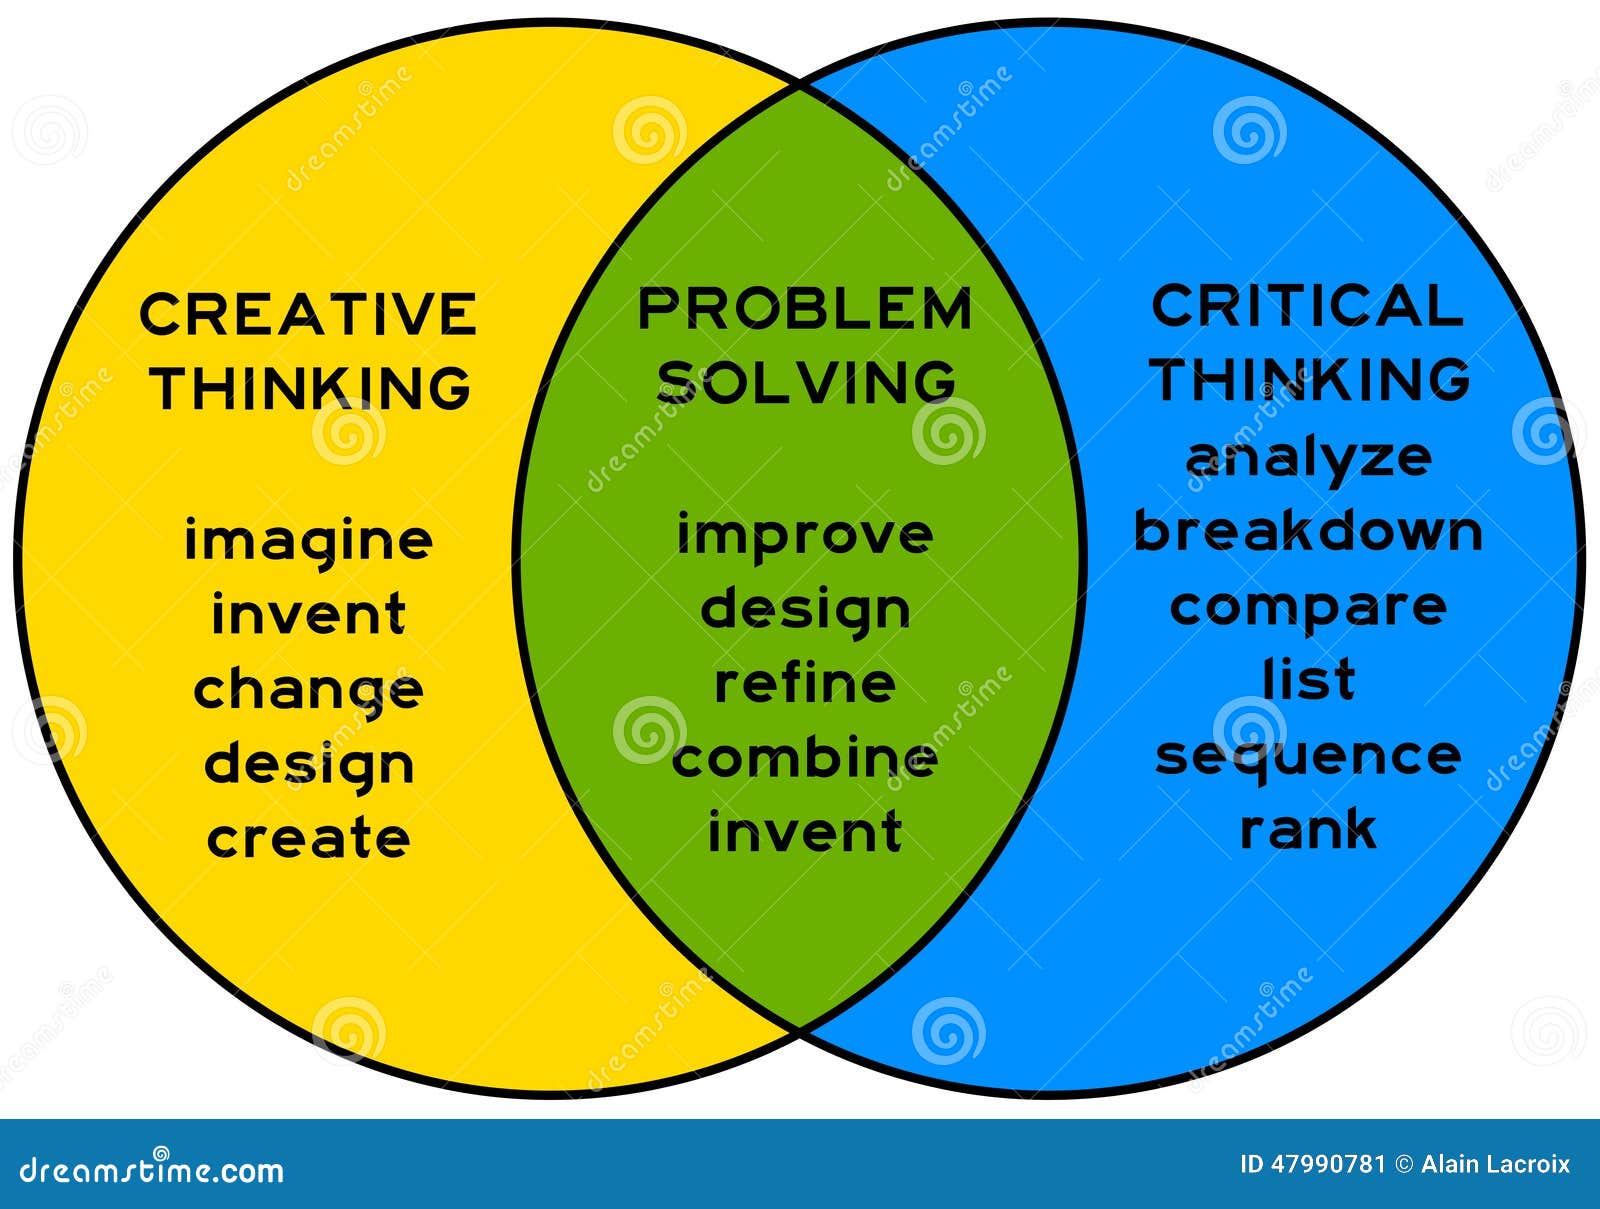 different between problem solving and critical thinking